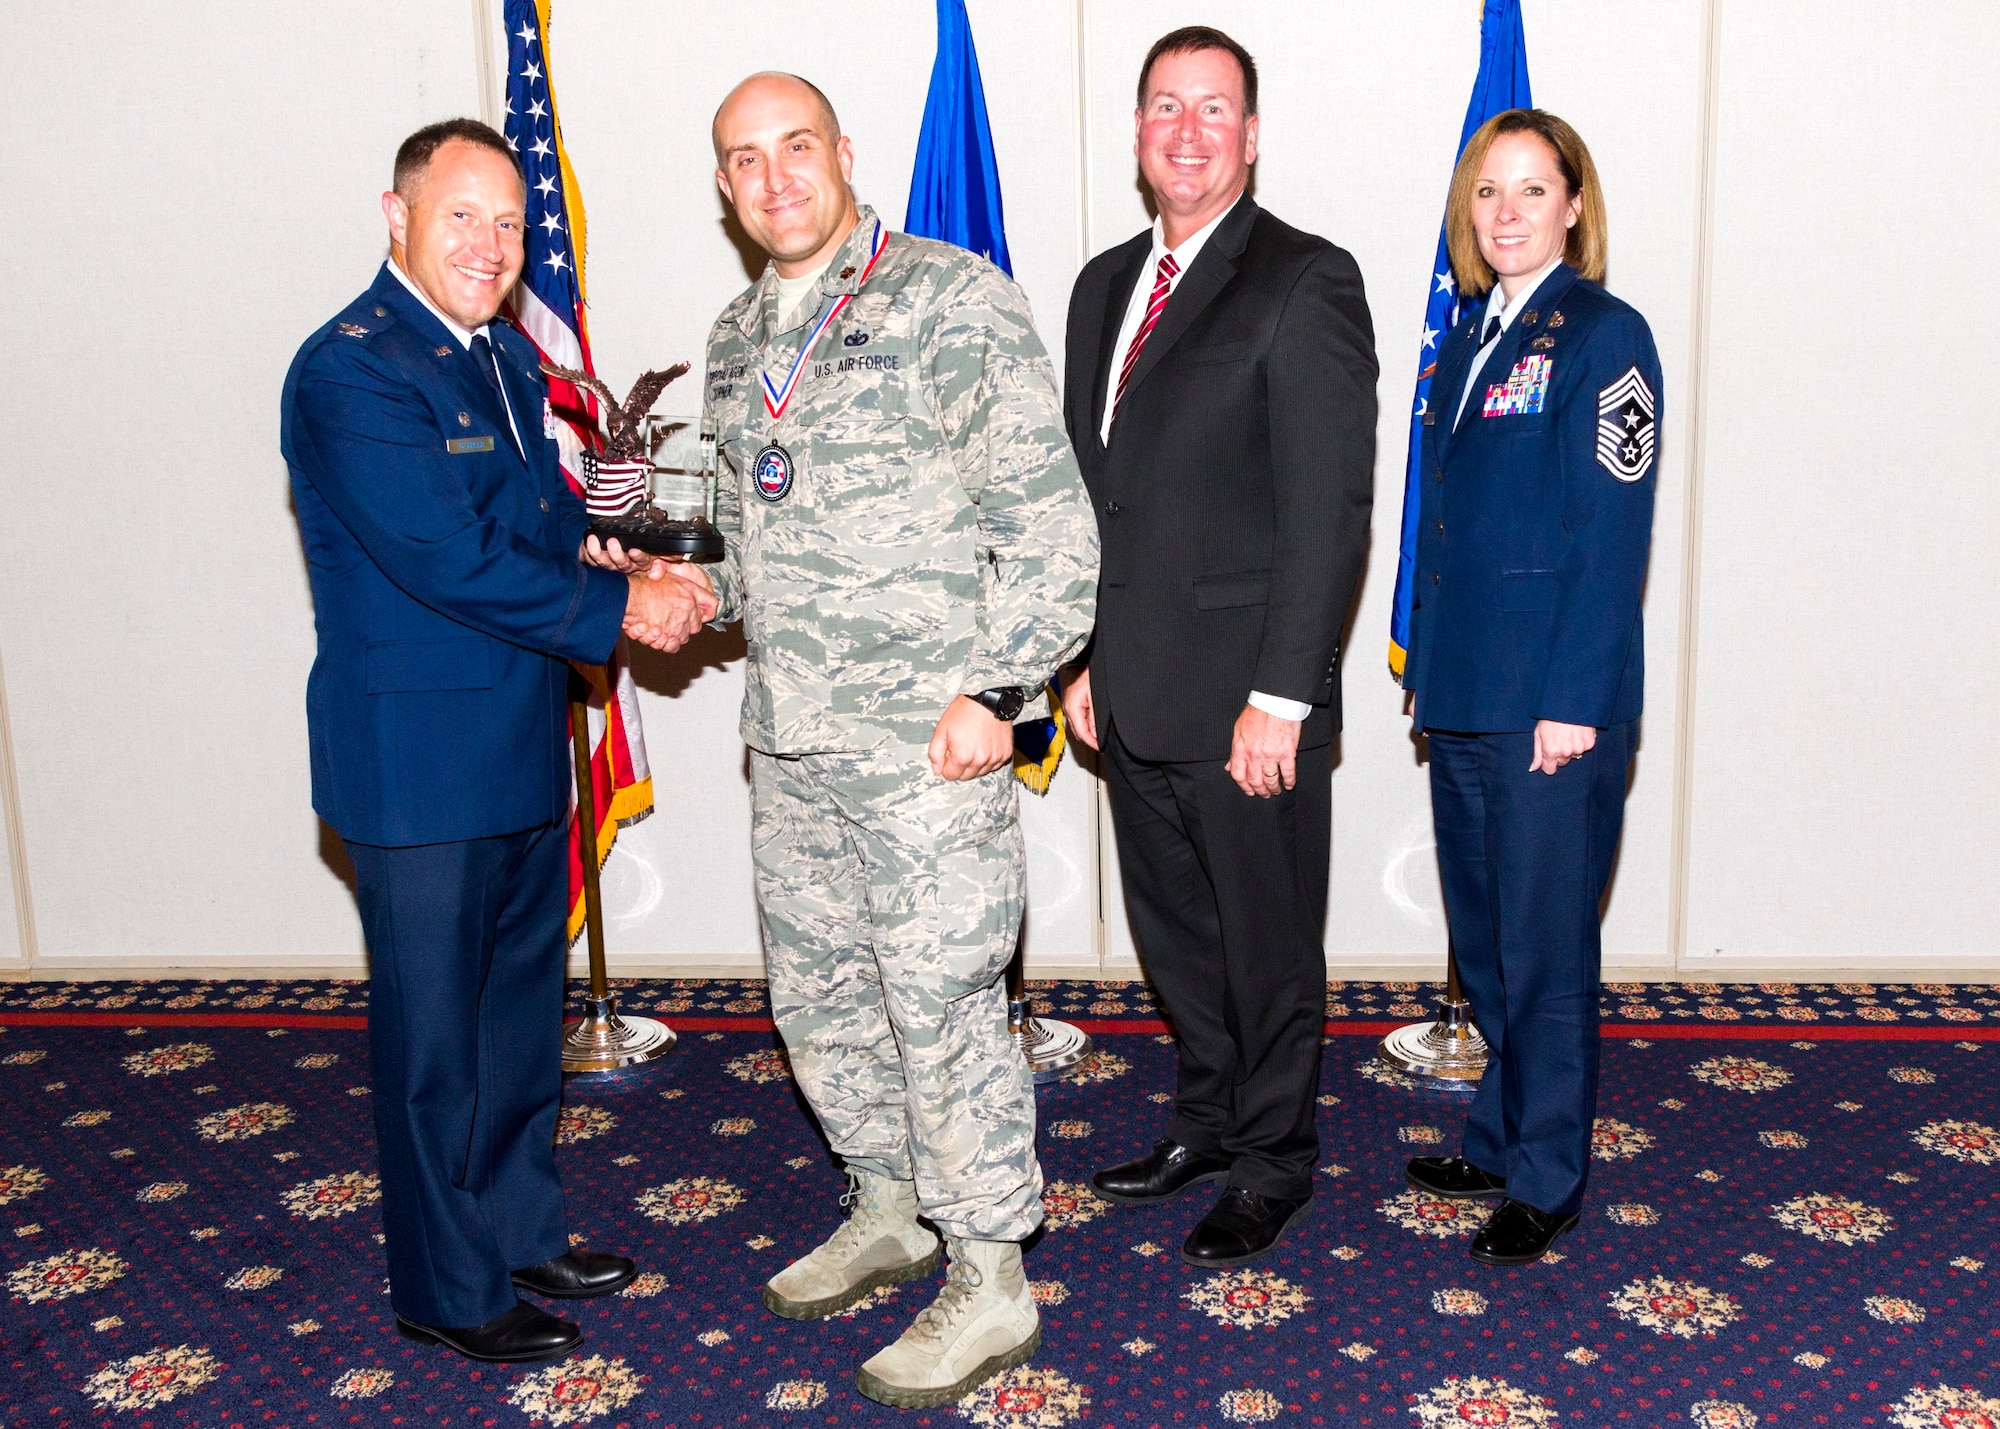 Maj. TJ Turner was recently awarded the Air Force Office of Special Investigations Individual Mobilization Augmentee of the year award. Pictured left to right are Col. Kirk Stabler, Commander, AFOSI, Maj. TJ Turner, Mr. Jeffrey Specht, Executive Director, AFOSI and Chief Master Sgt. Karen Beirne Flint, Command Chief, AFOSI. (U.S. Air Force courtesy photo)